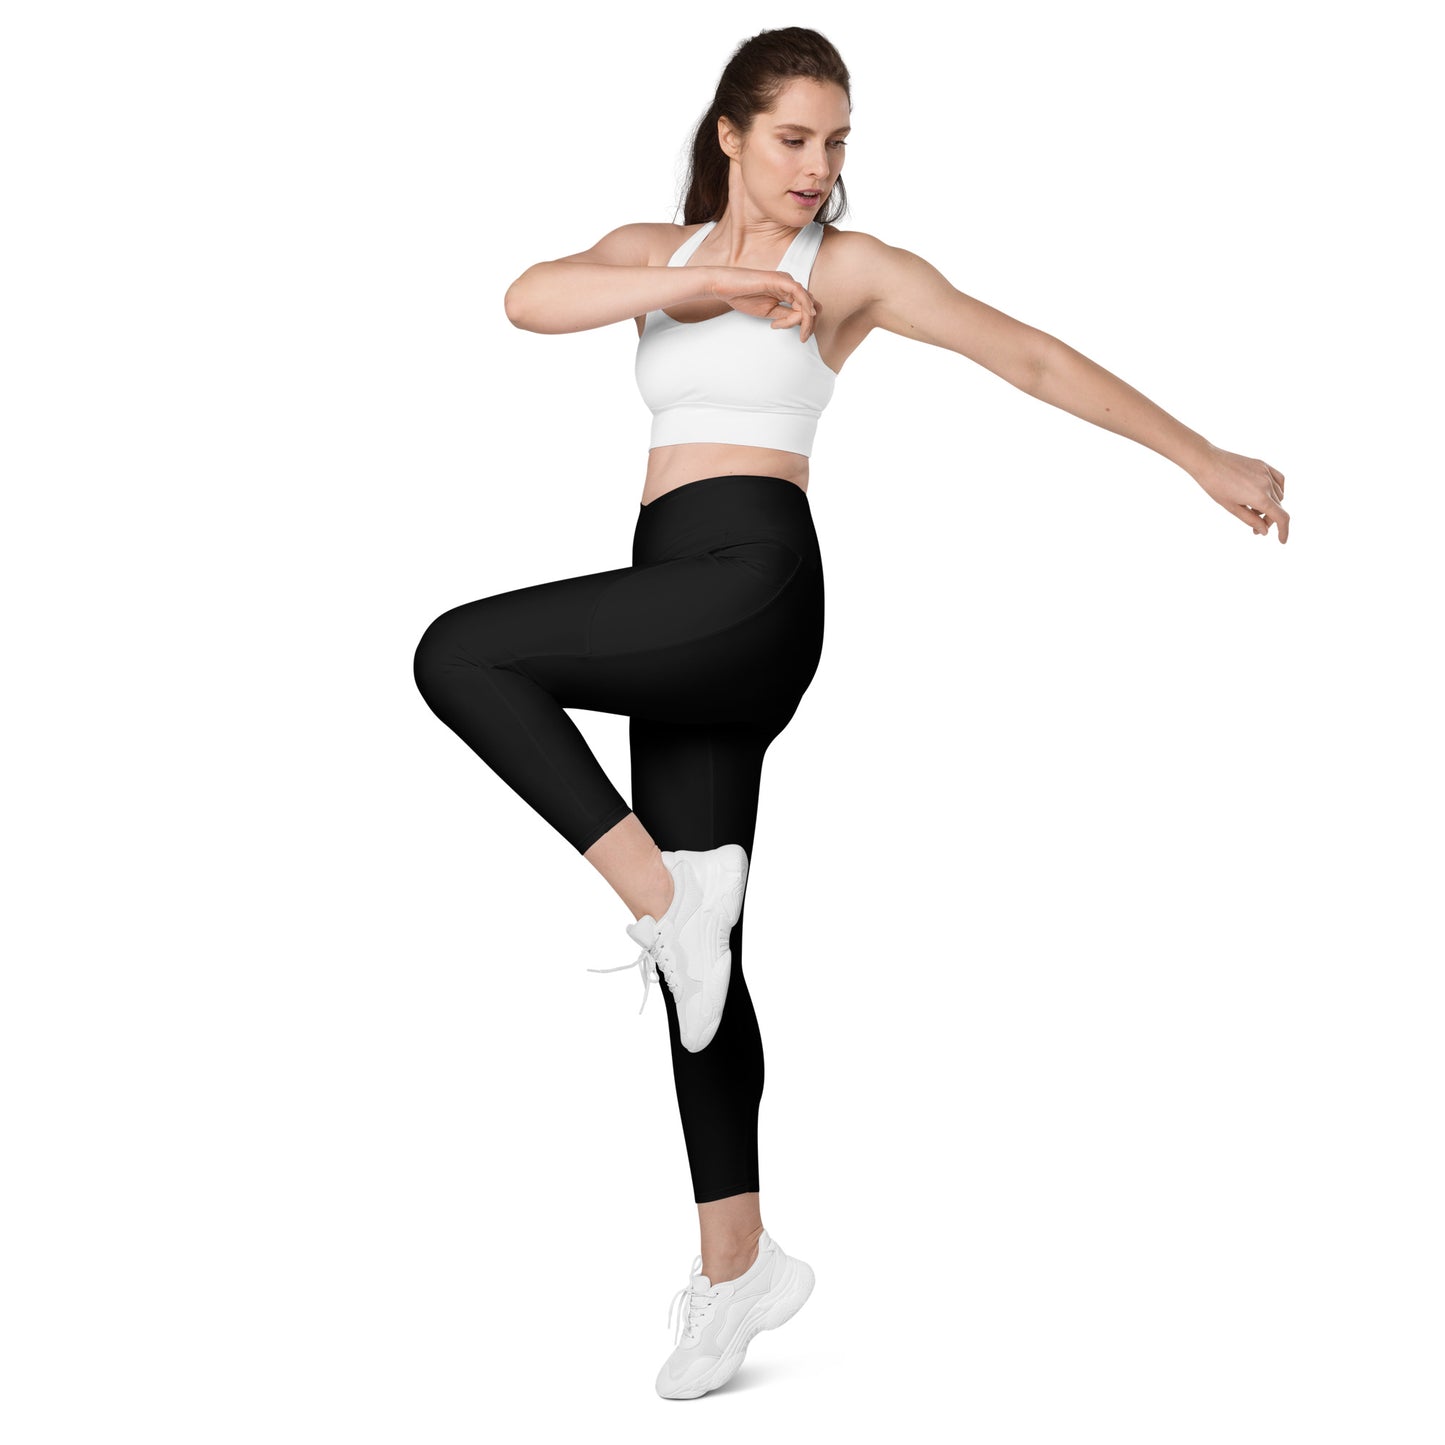 Crossover front leggings with pockets